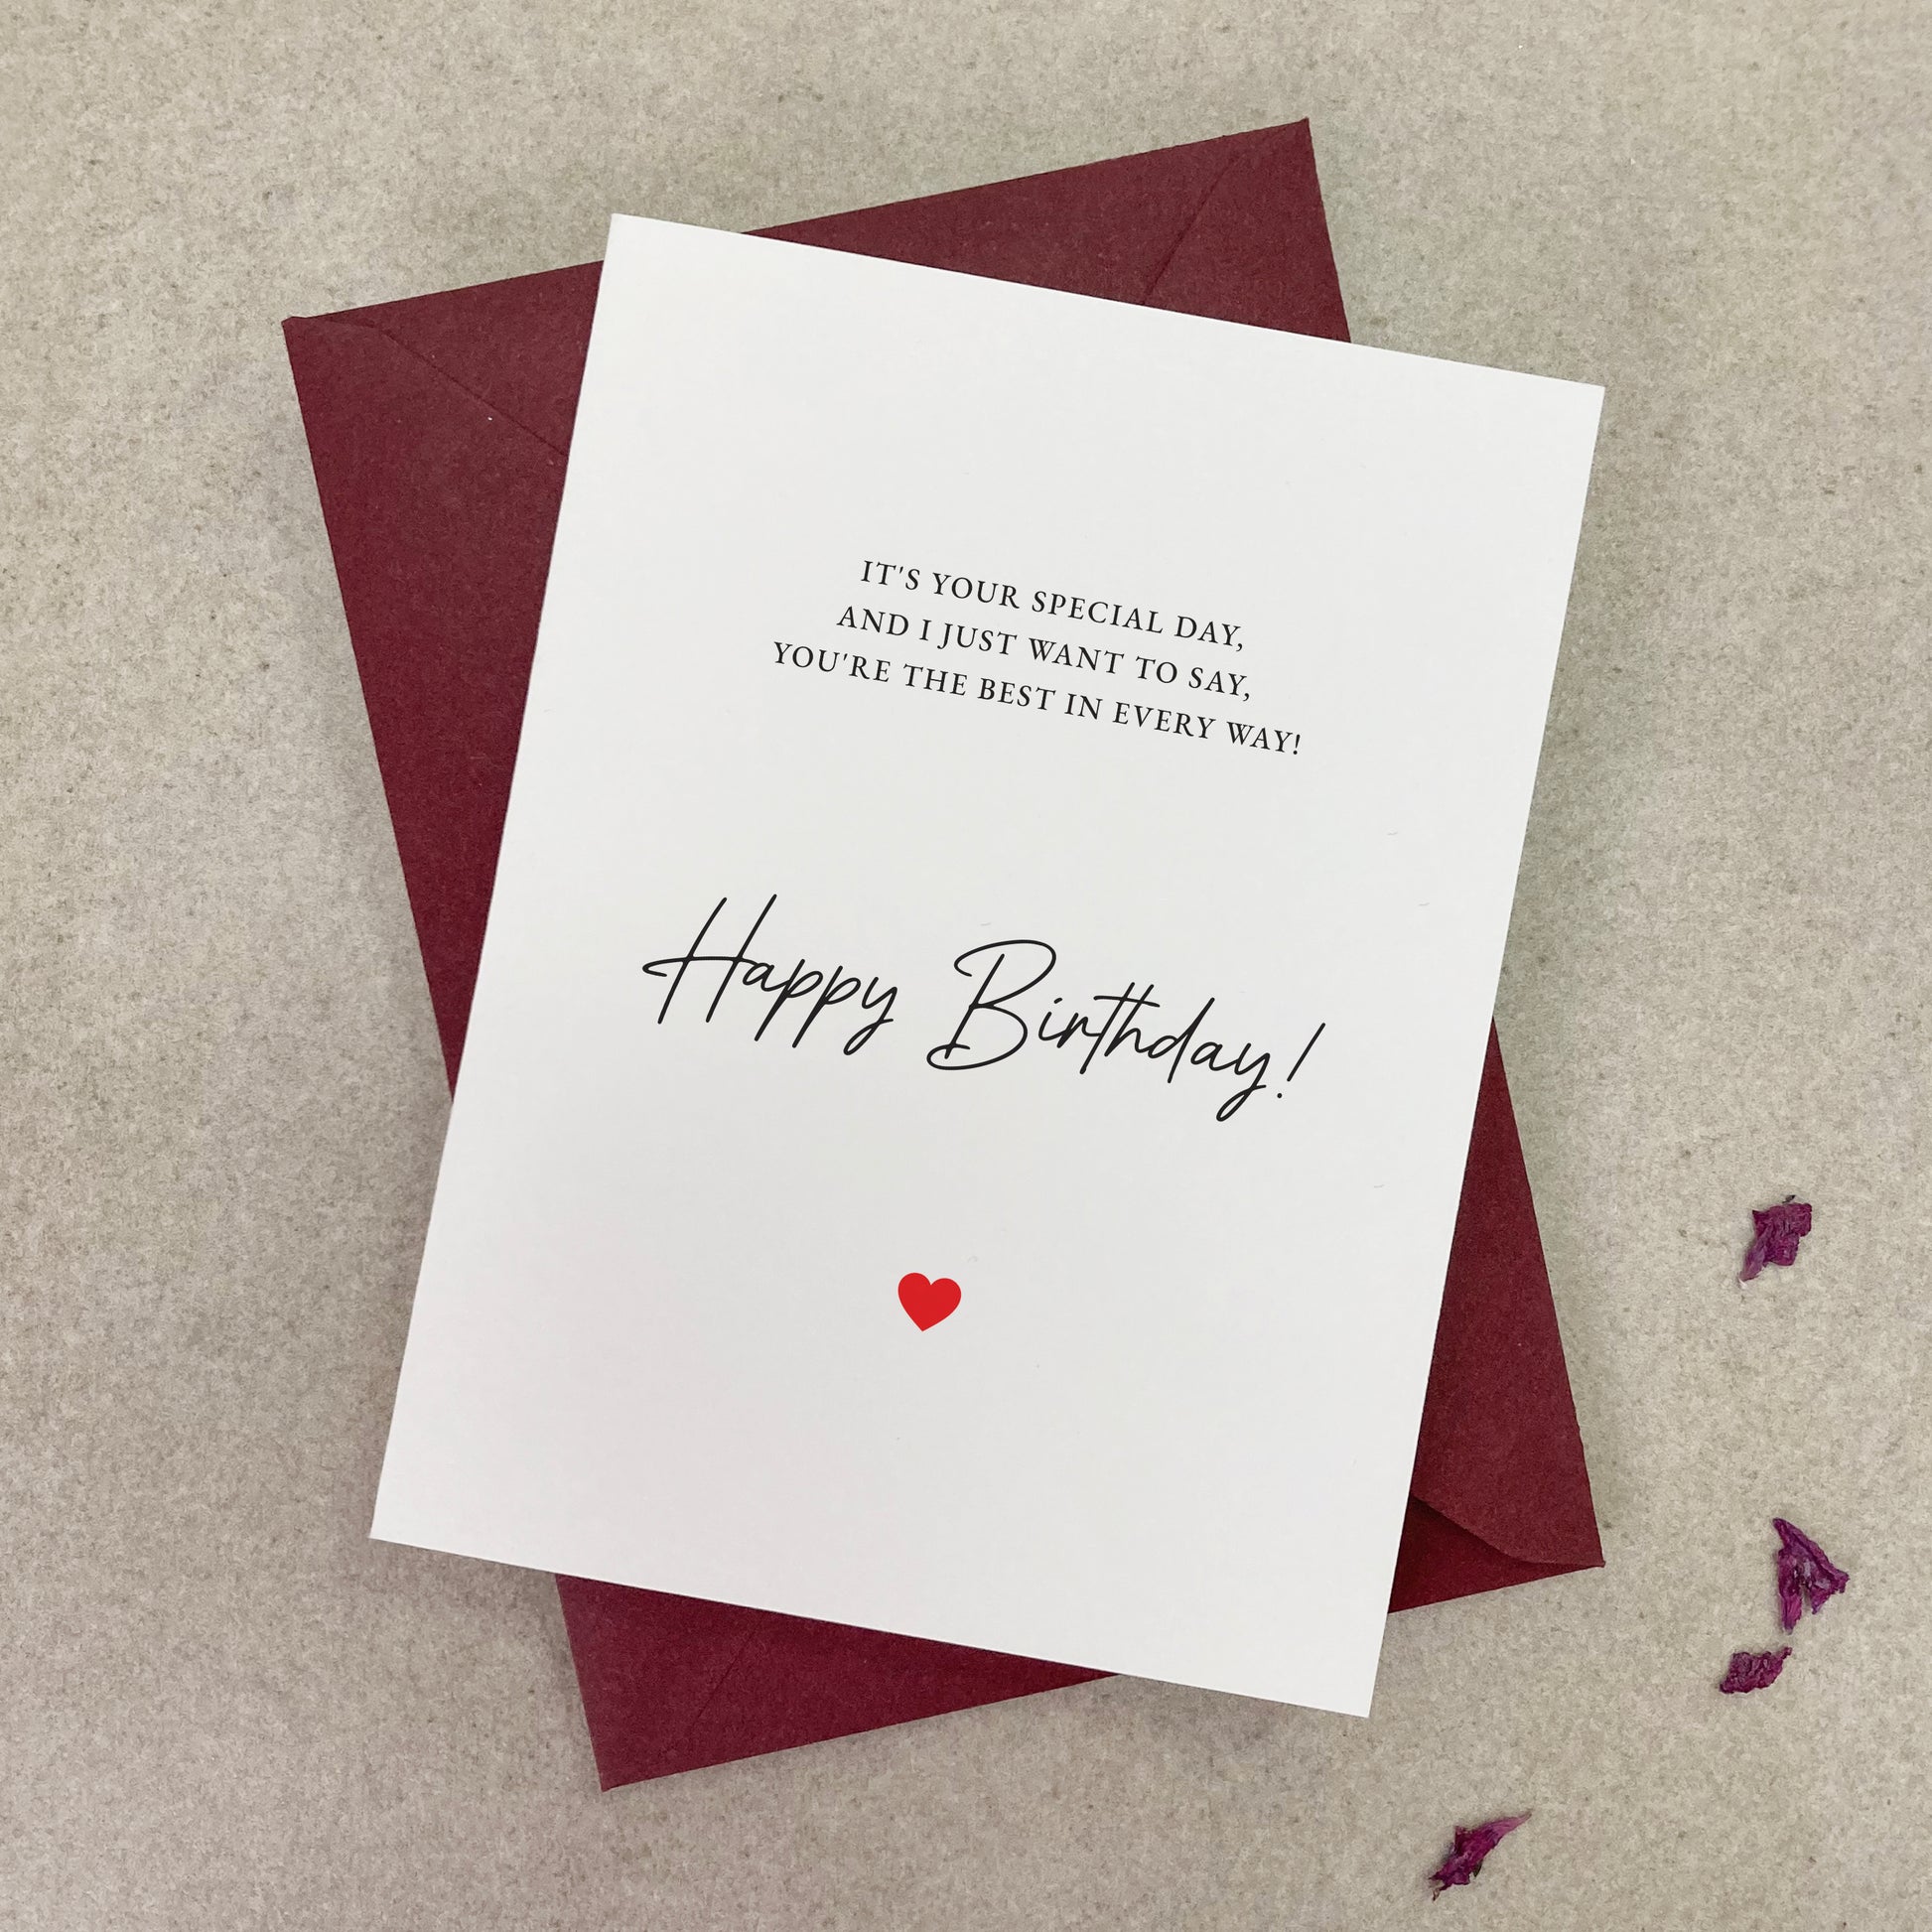 happy birthday greeting card for a best friend - XOXOKristen